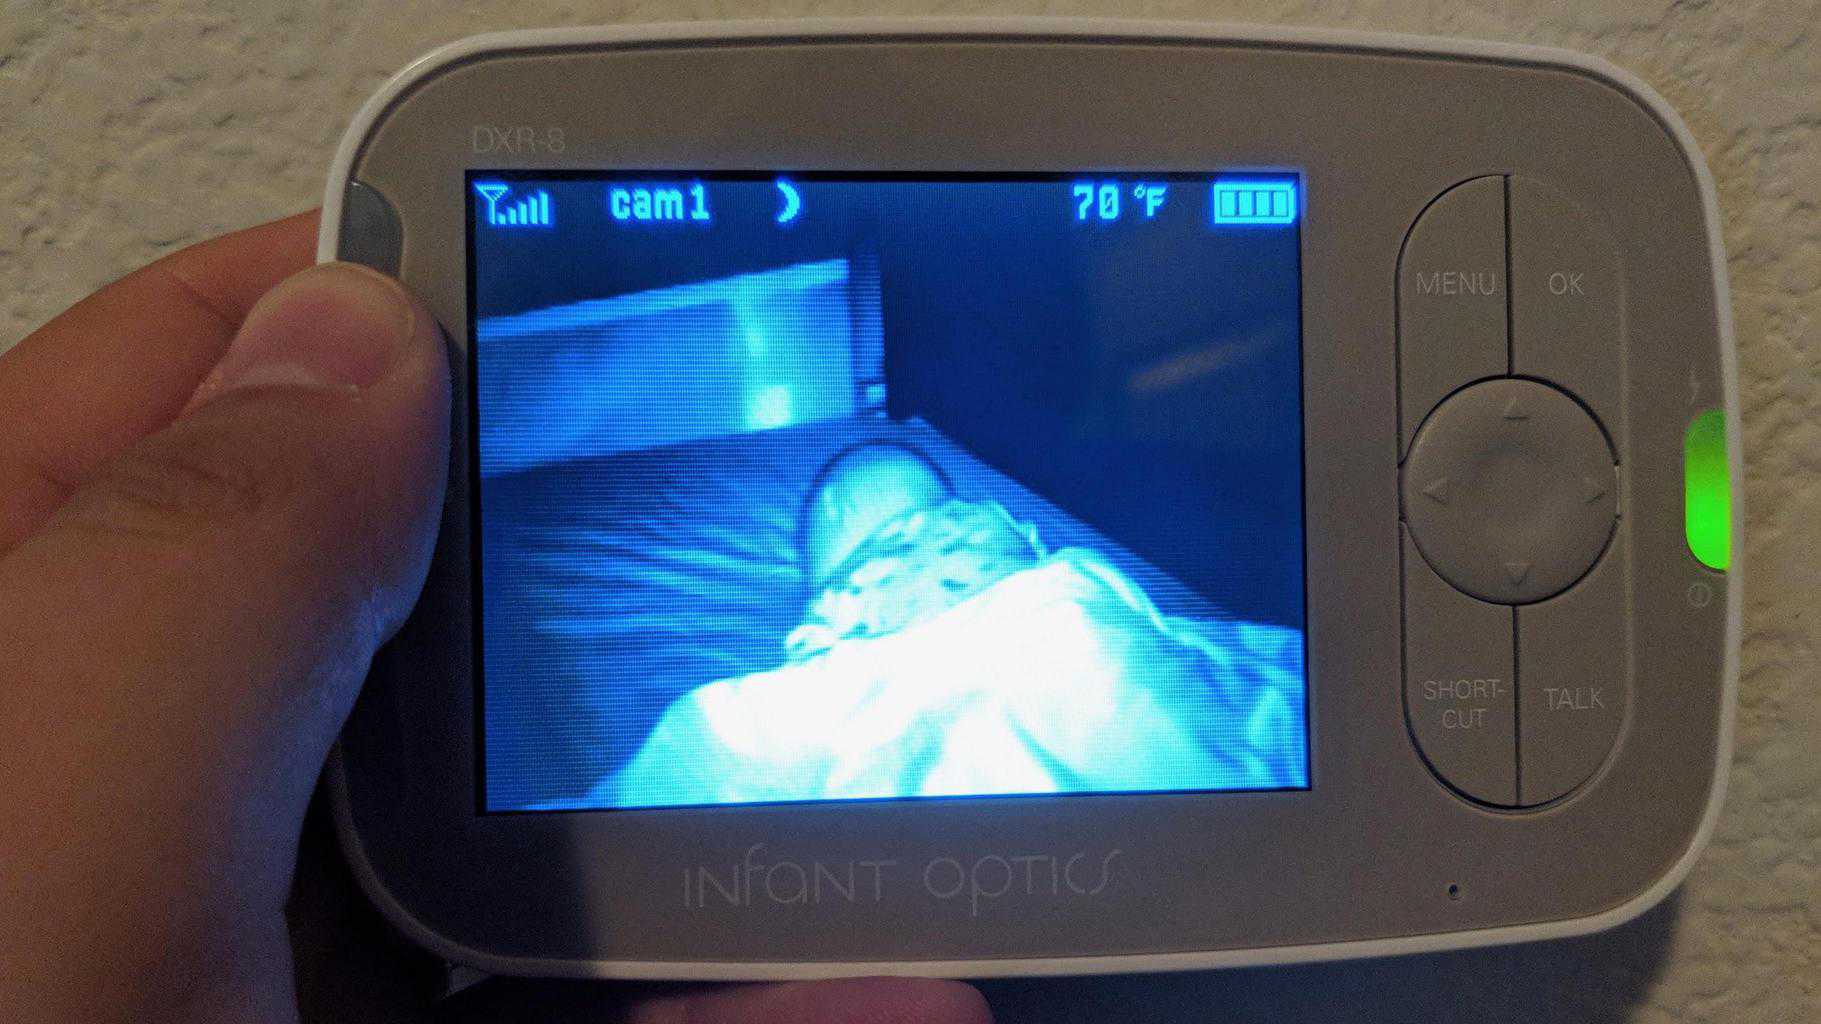 The night vision allows you to monitor your baby in dark! - Infant Optics DXR-8 Review | Baby Journey